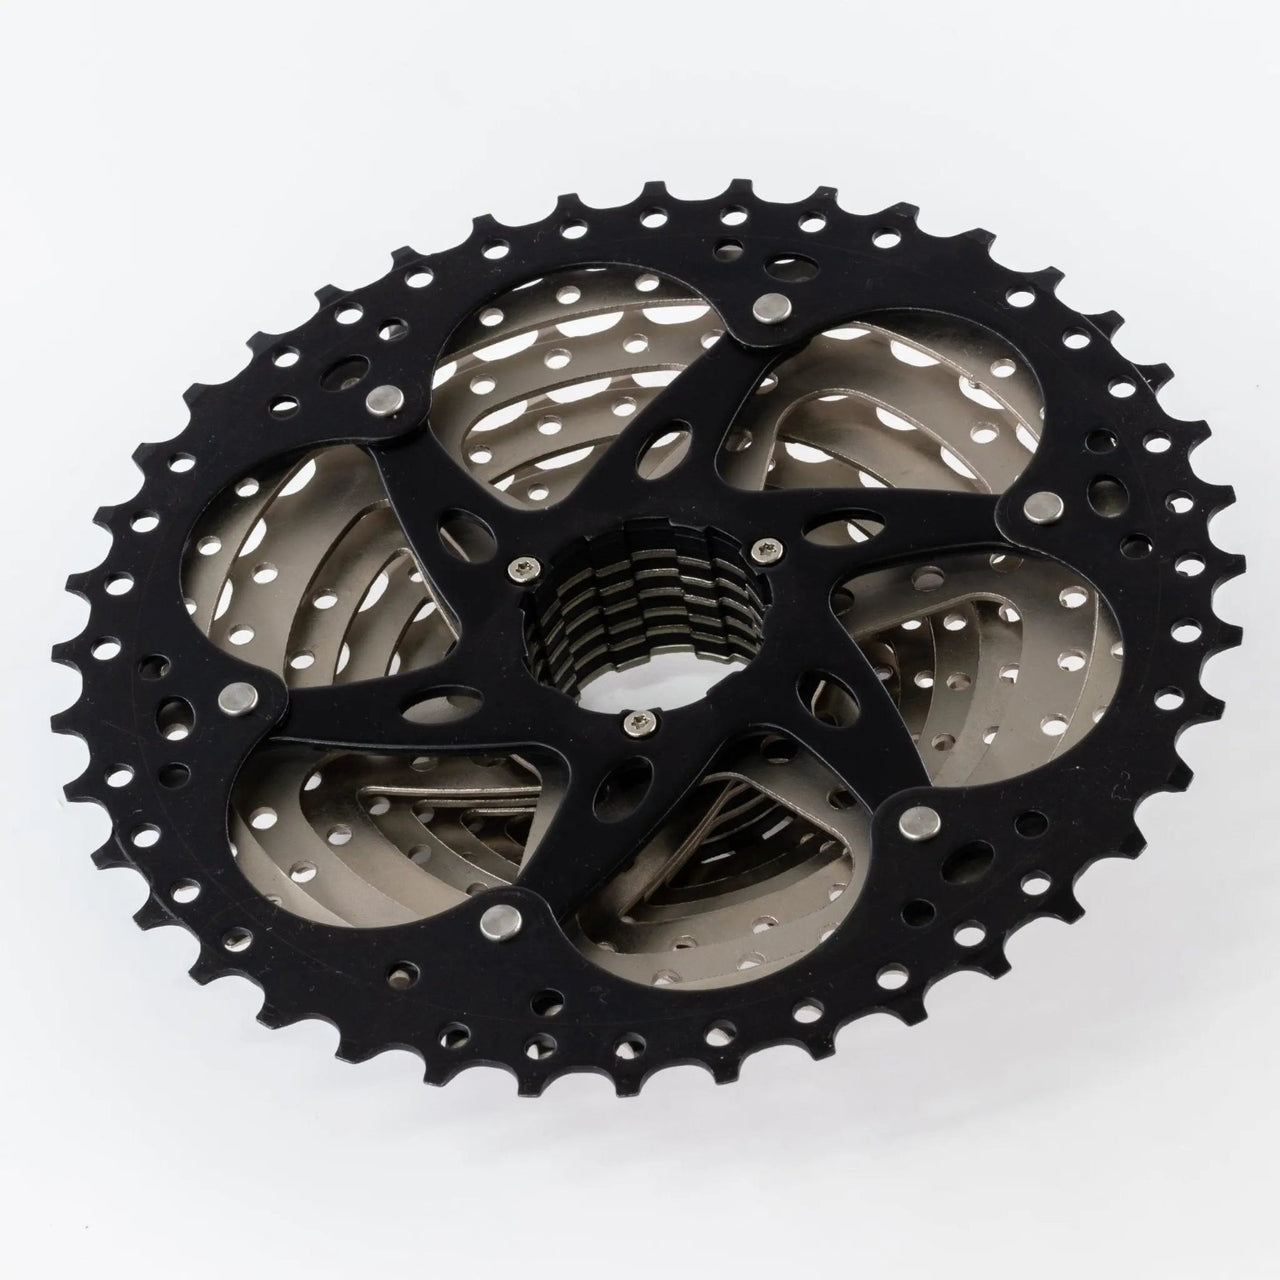 Shimano Compatible 11-40 10 Speed Cassette by AirBike